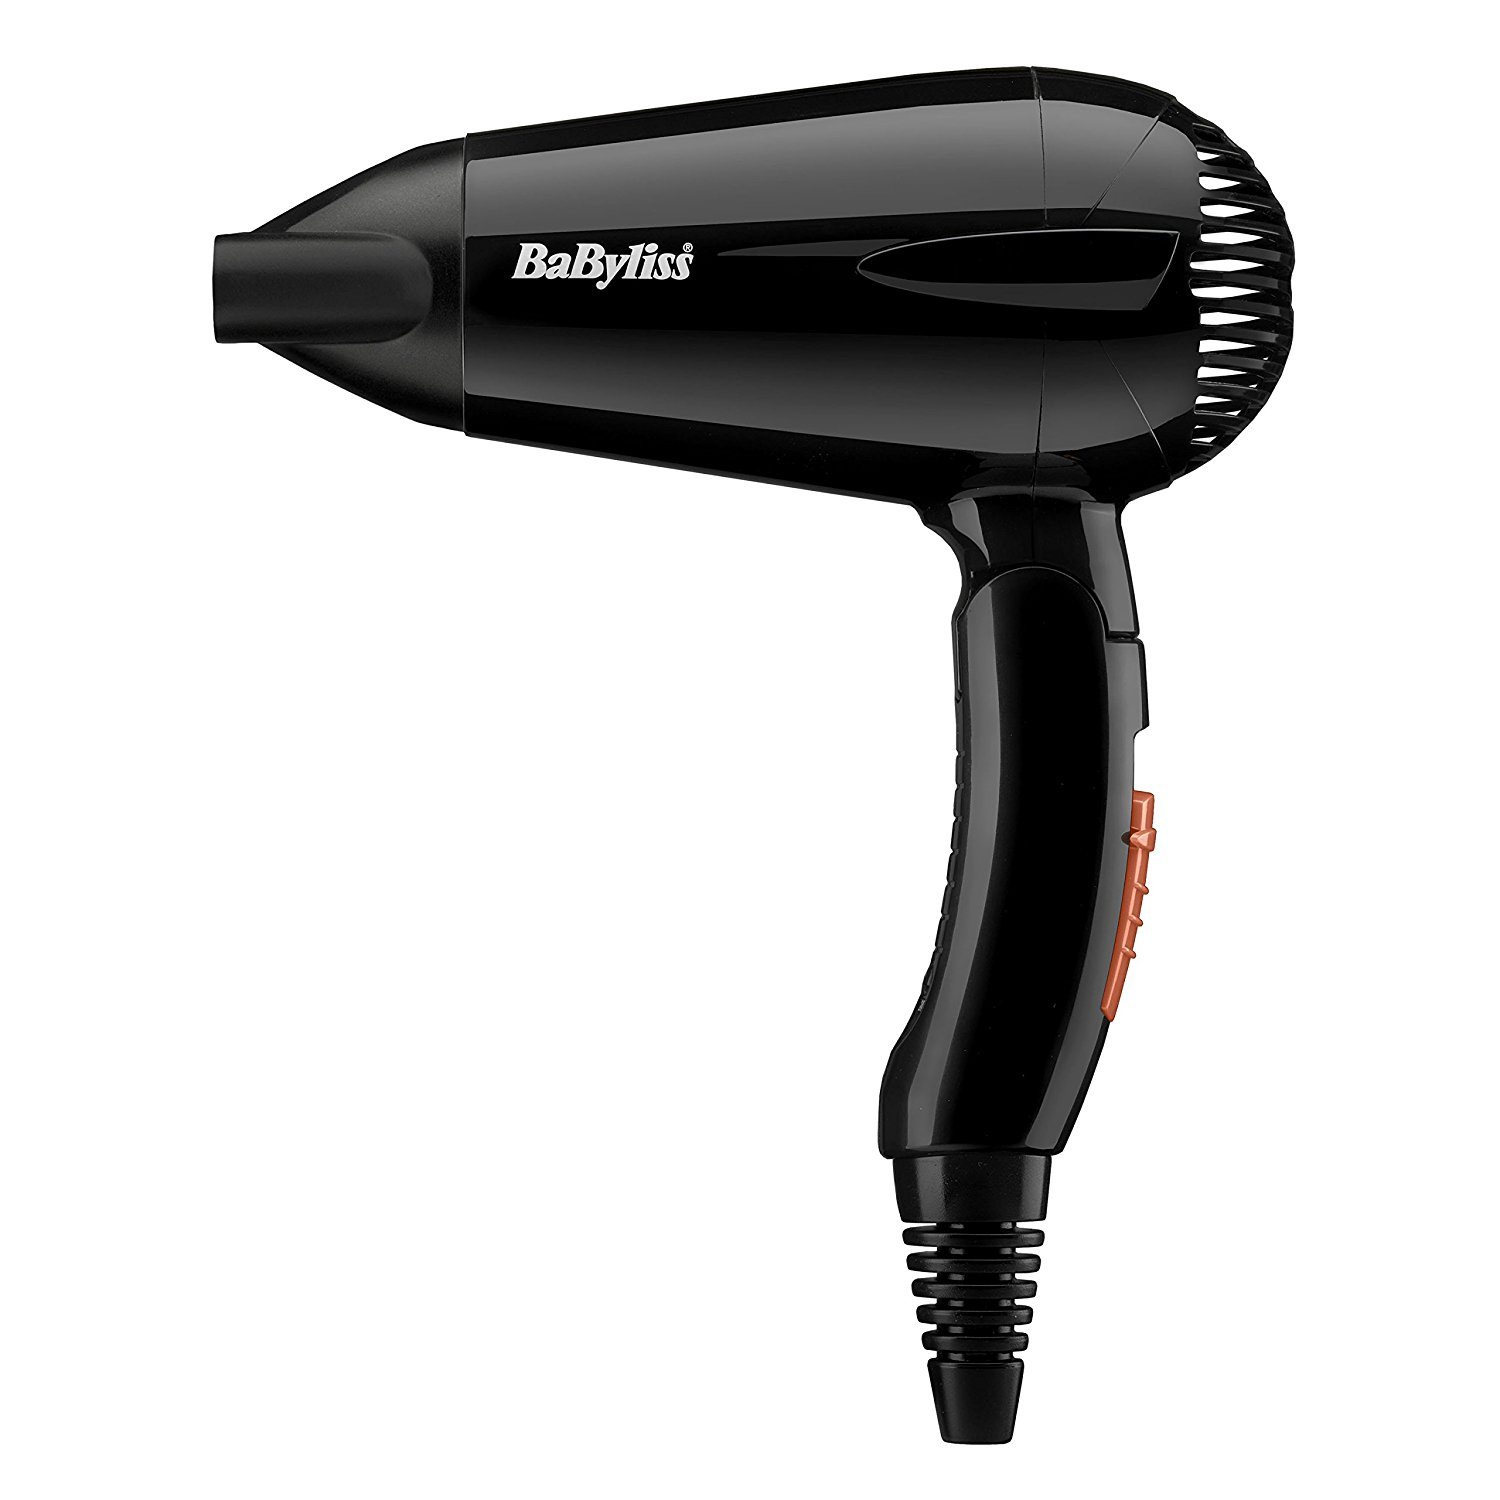 BaByliss travel 2000w Hair Dryer Picture